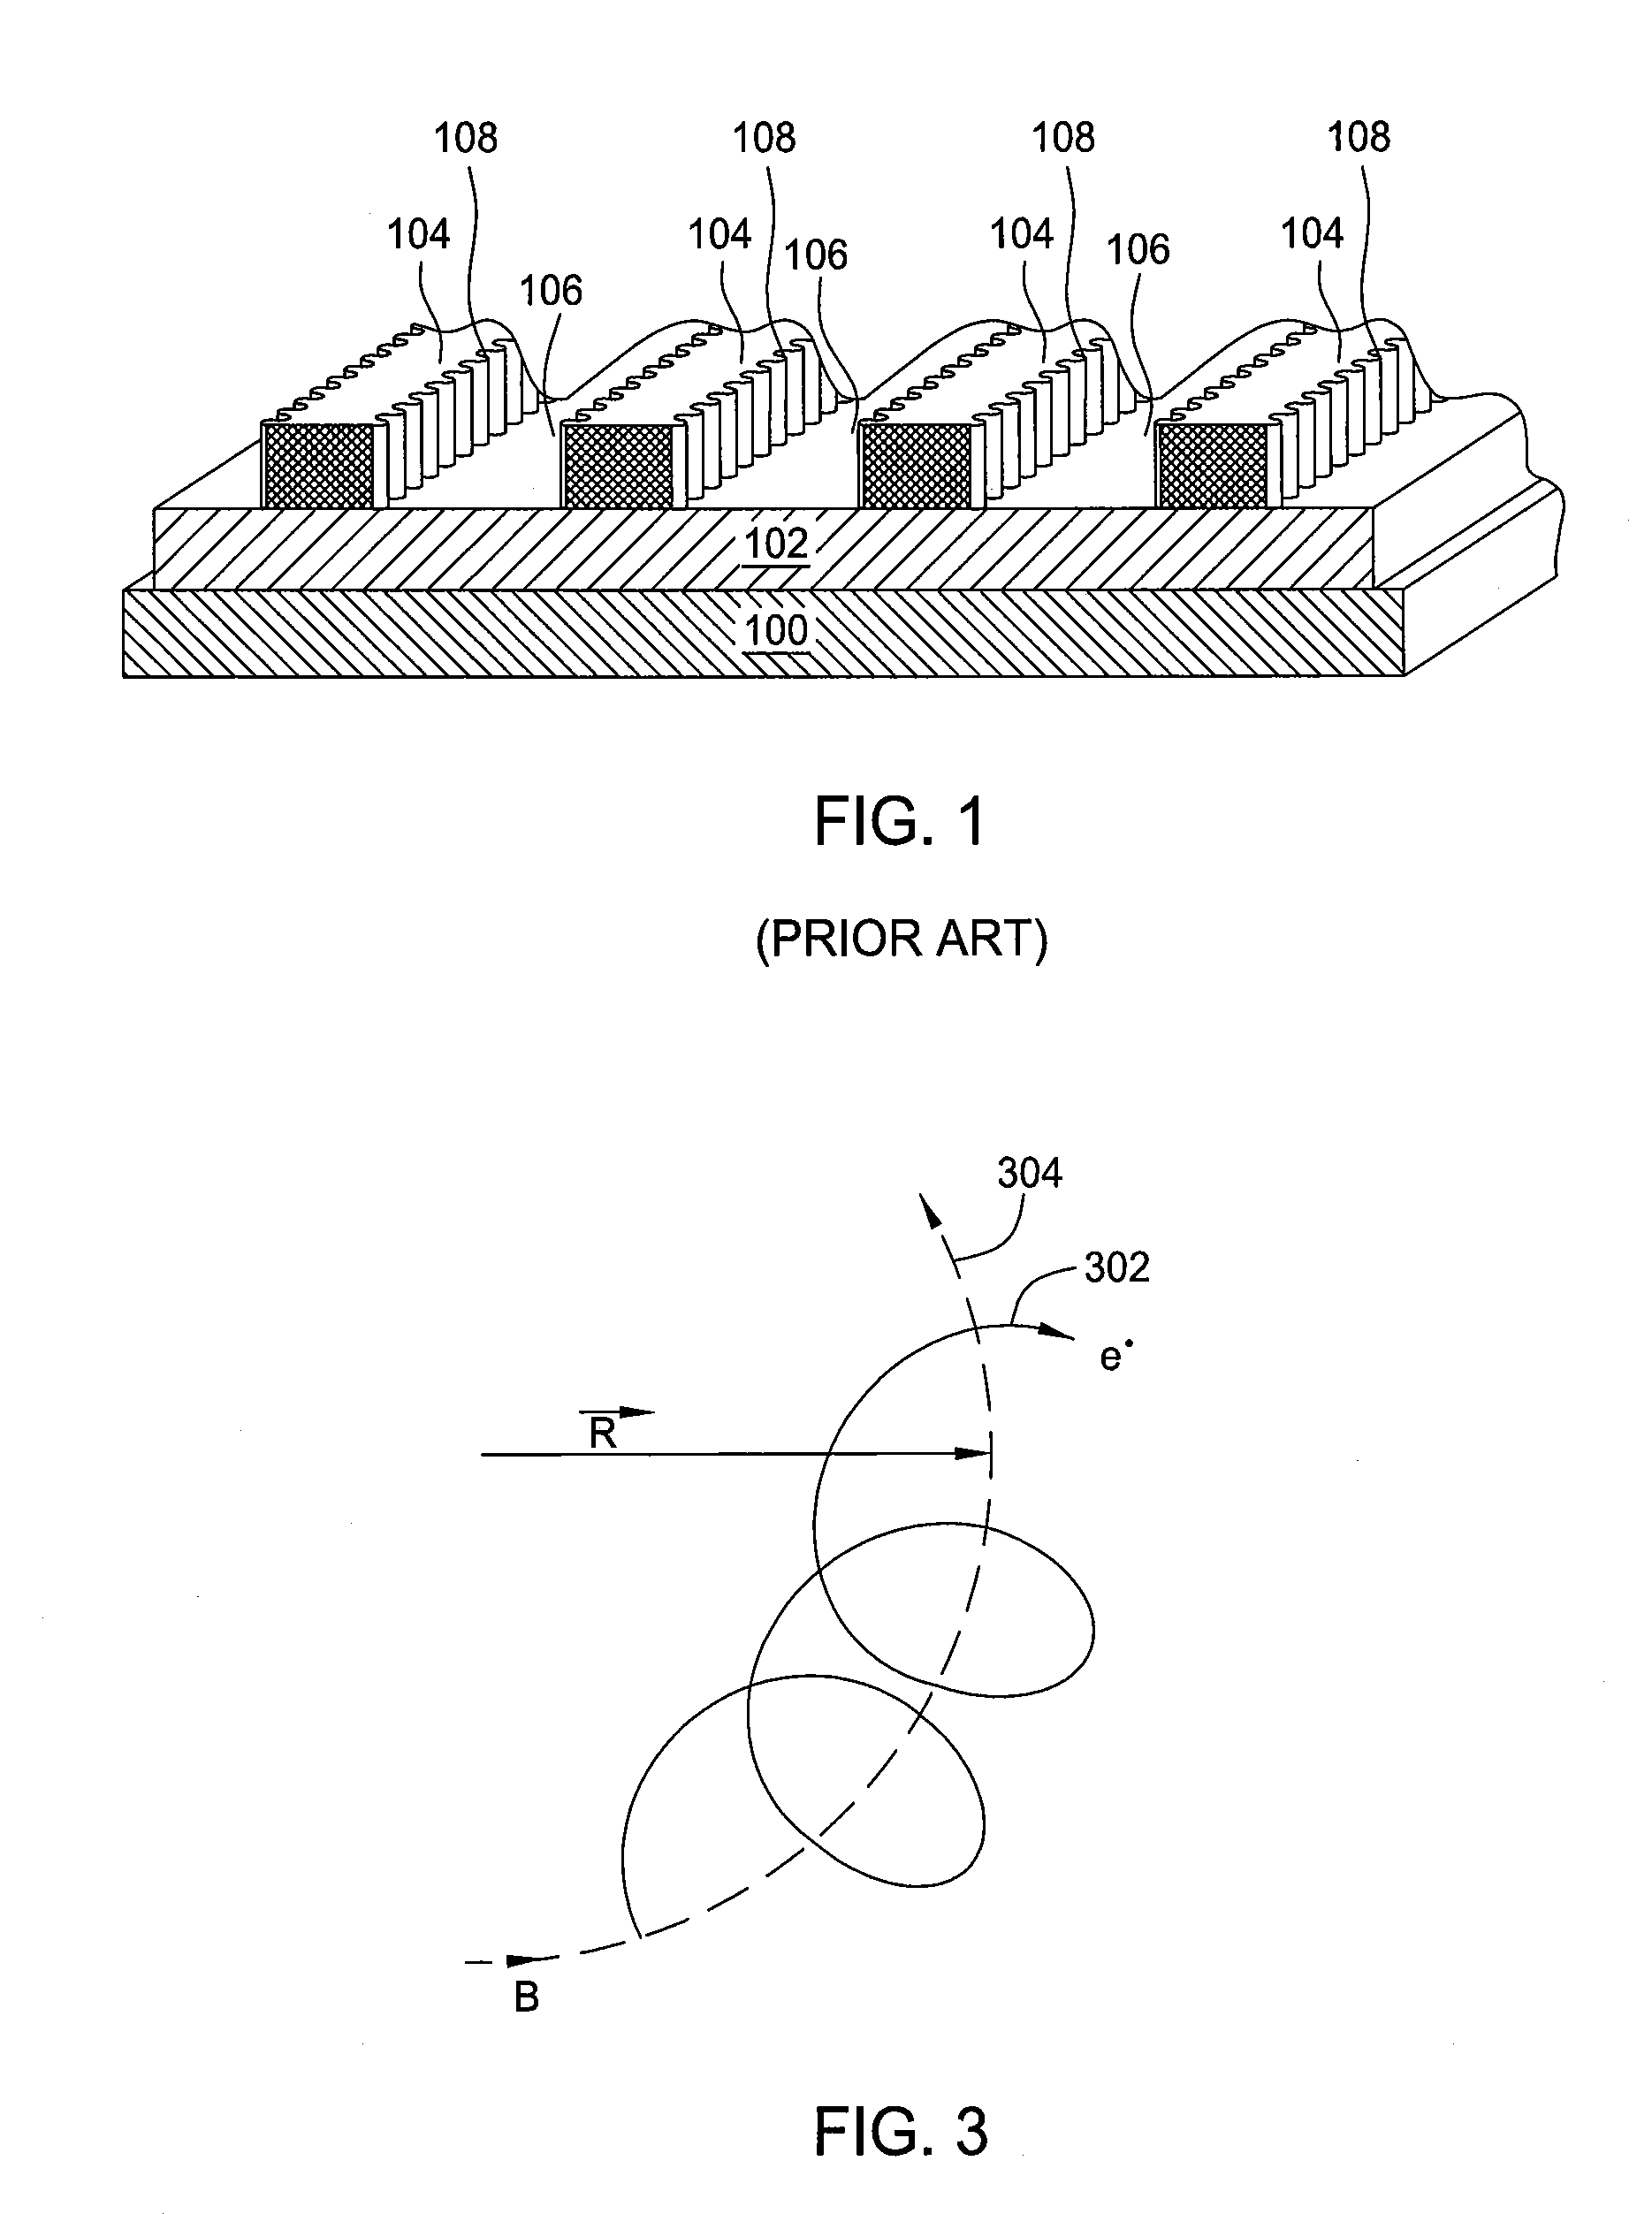 Methods and apparatus for performing multiple photoresist layer development and etching processes